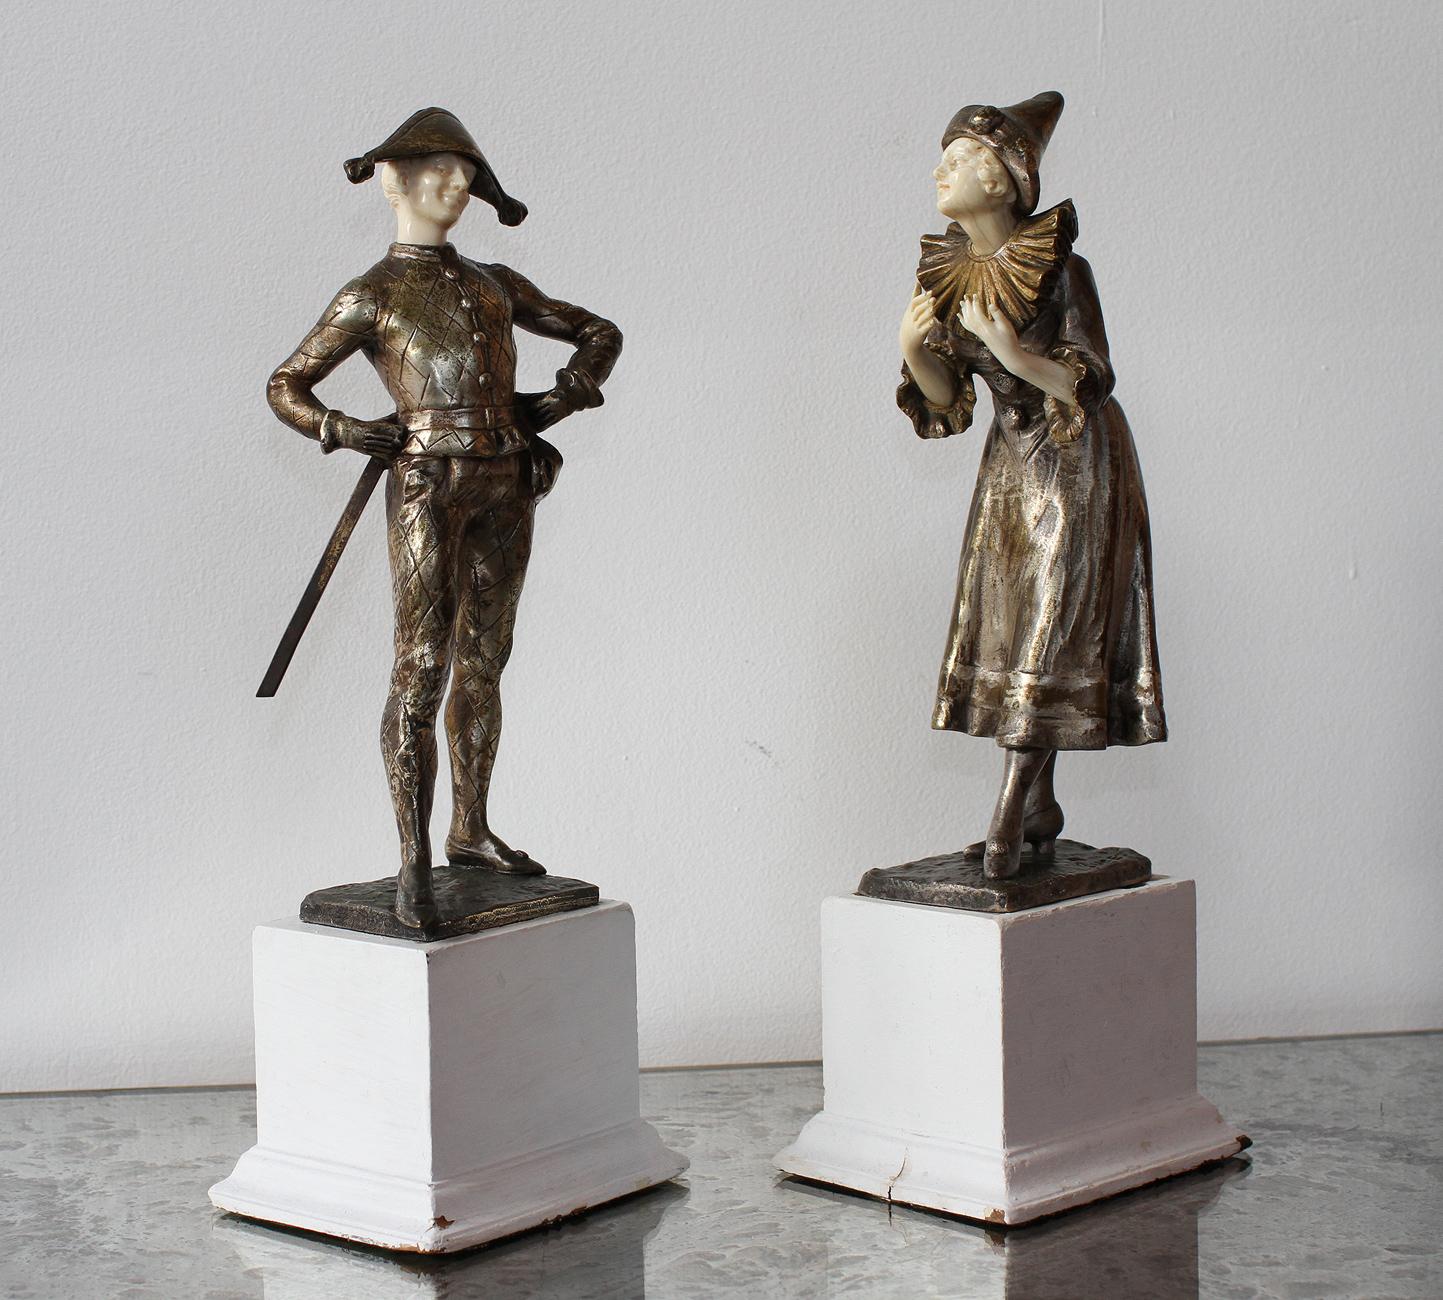 LUCE

Beautiful and very glamour pair of 1920 sculptures depicting Harlequin & Columbine,
France, 1920
The bronze has a beautiful original silver and gold patina and the bone carving is very delicate, principally in the Columbine fingers and both